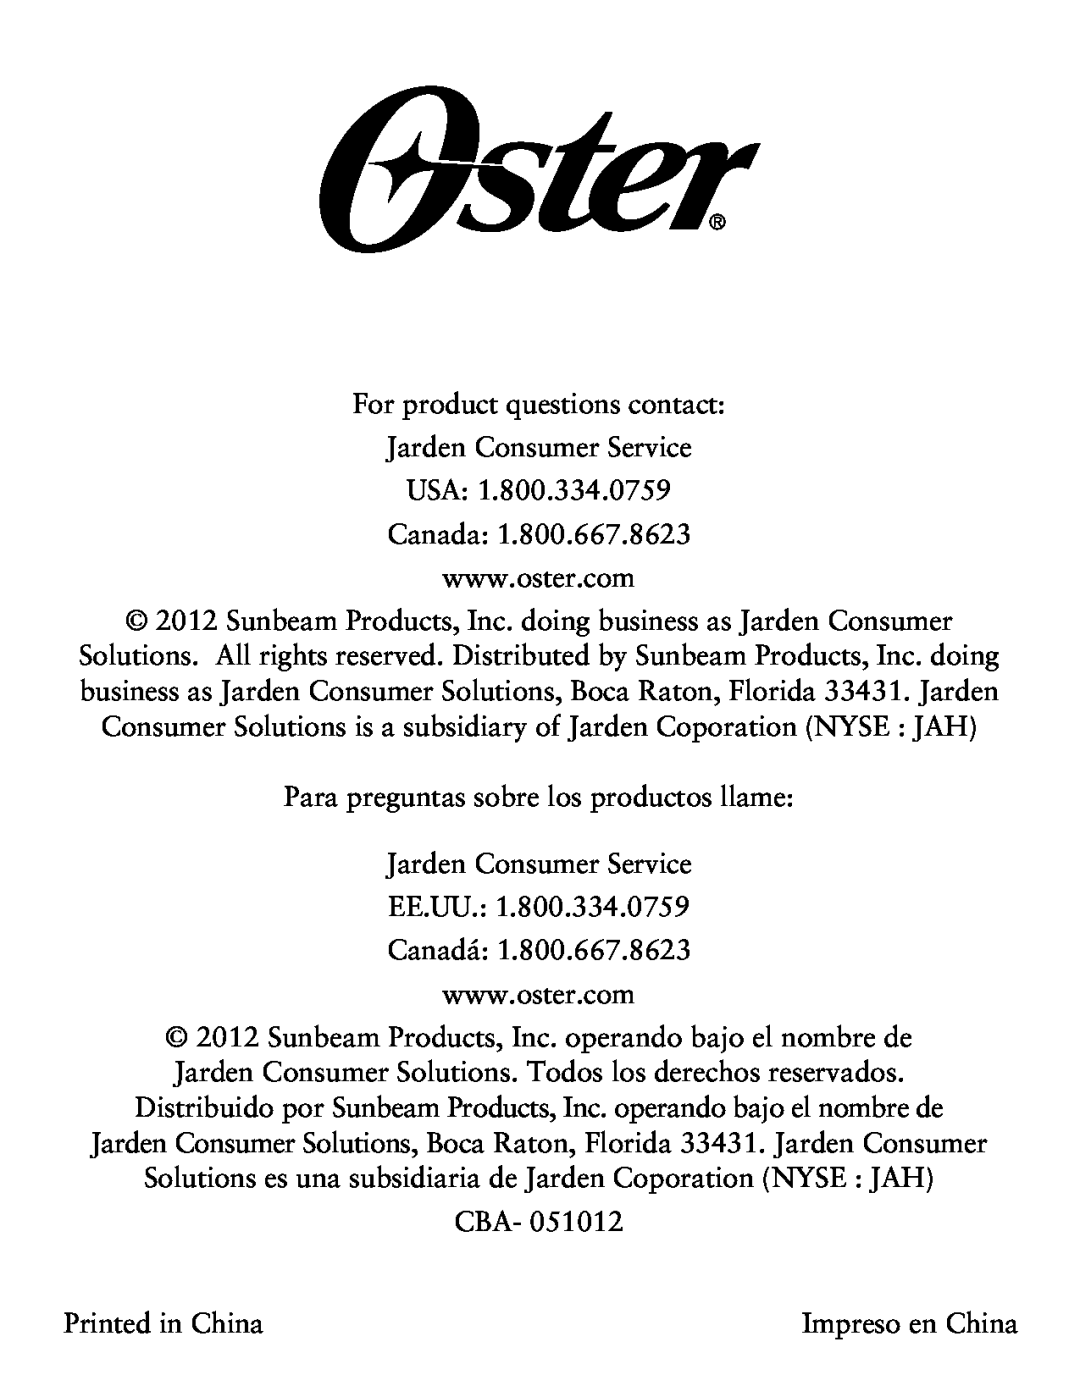 Oster TSSTTVDGSM, Small Digital Oven user manual For product questions contact Jarden Consumer Service USA Canada 